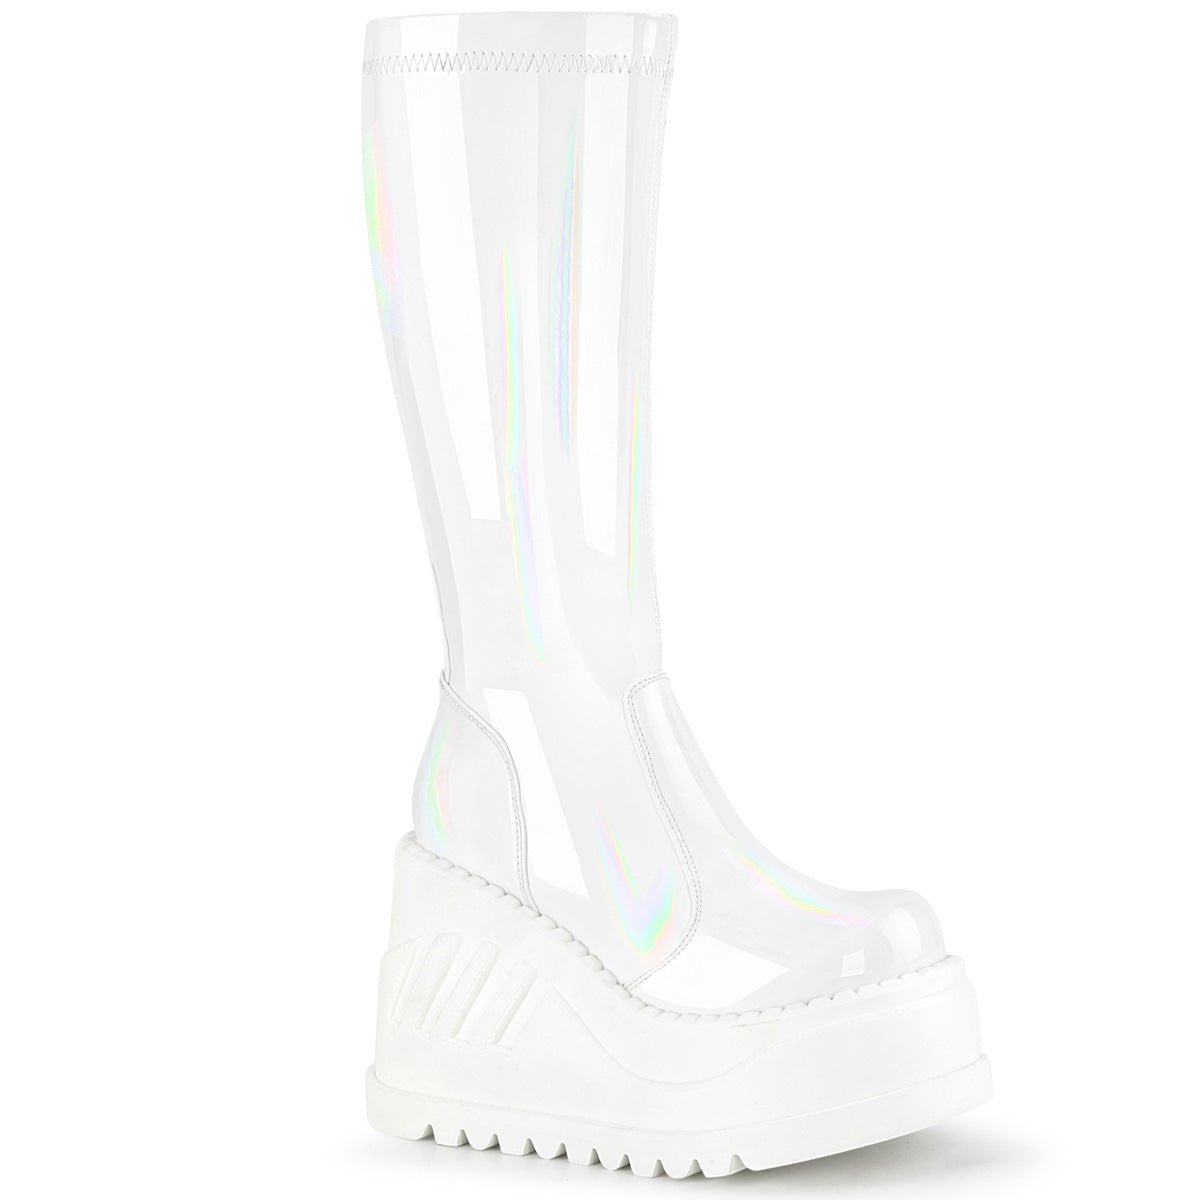 Too Fast | Demonia Stomp 200 | White Hologram Stretch Patent Leather Women's Knee High Boots